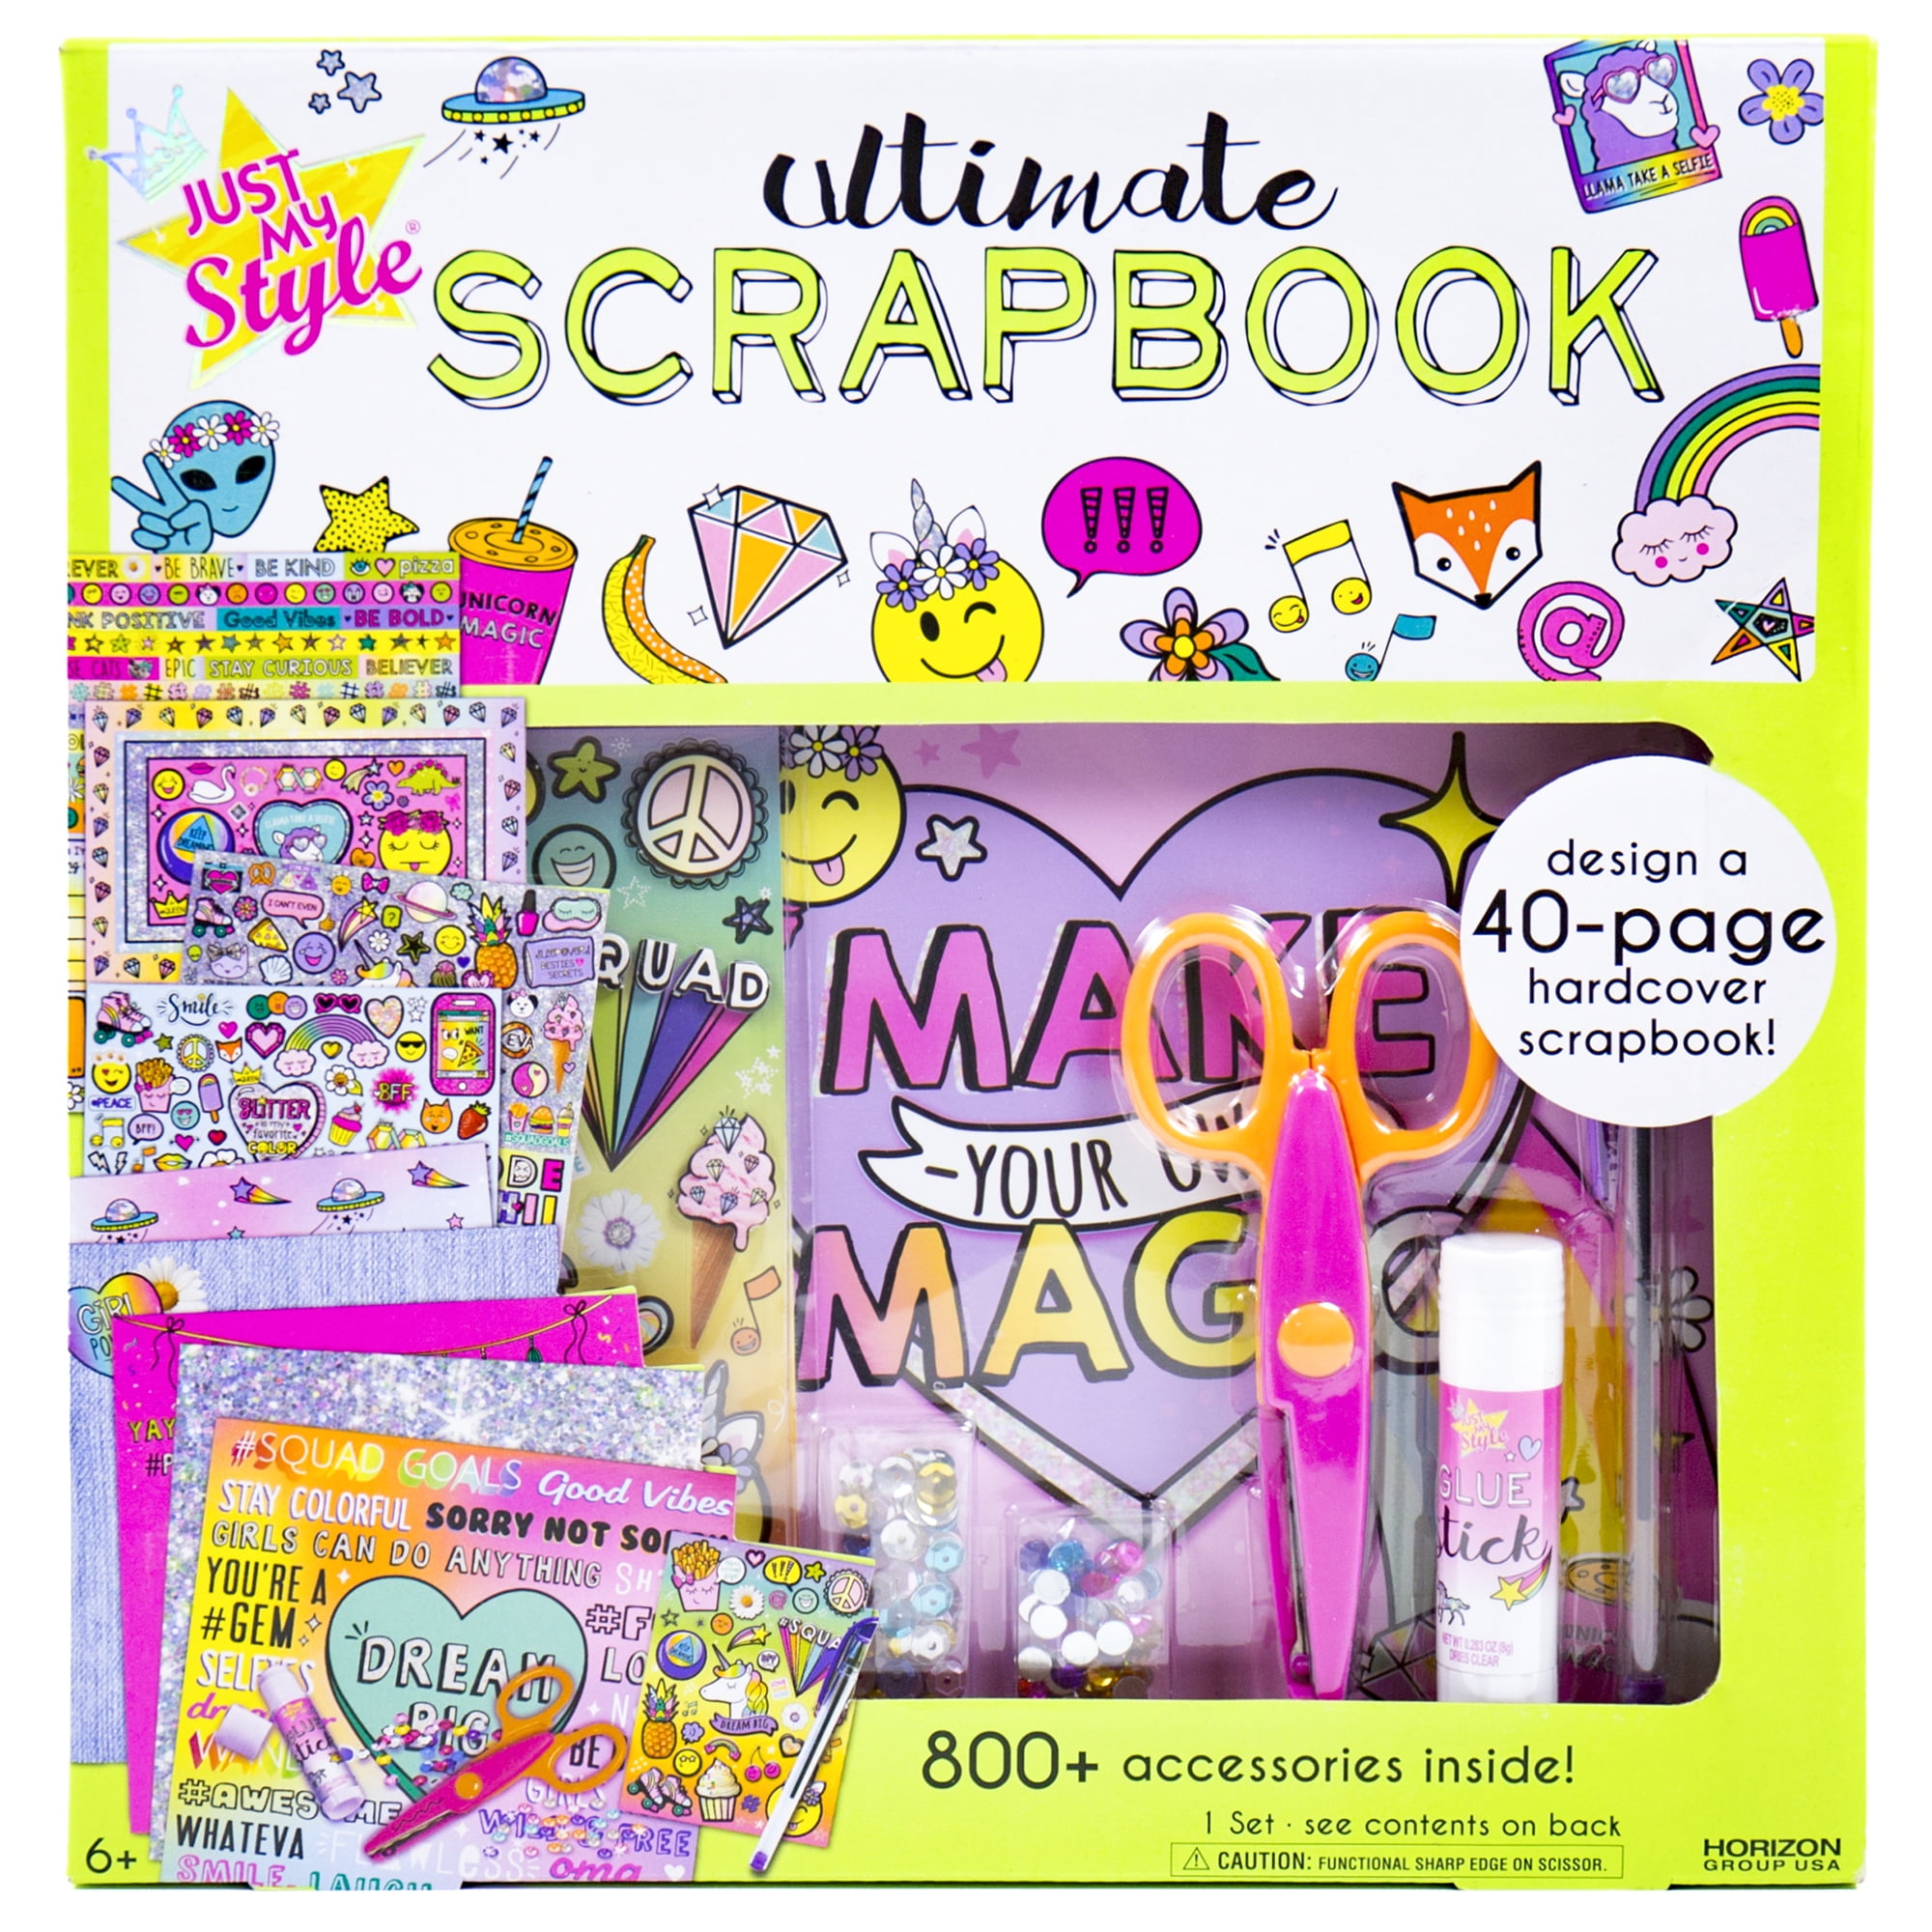 30 Page Scrapbook Transparent Trading Cards 9 compartments 270 Cards including Pokemon 